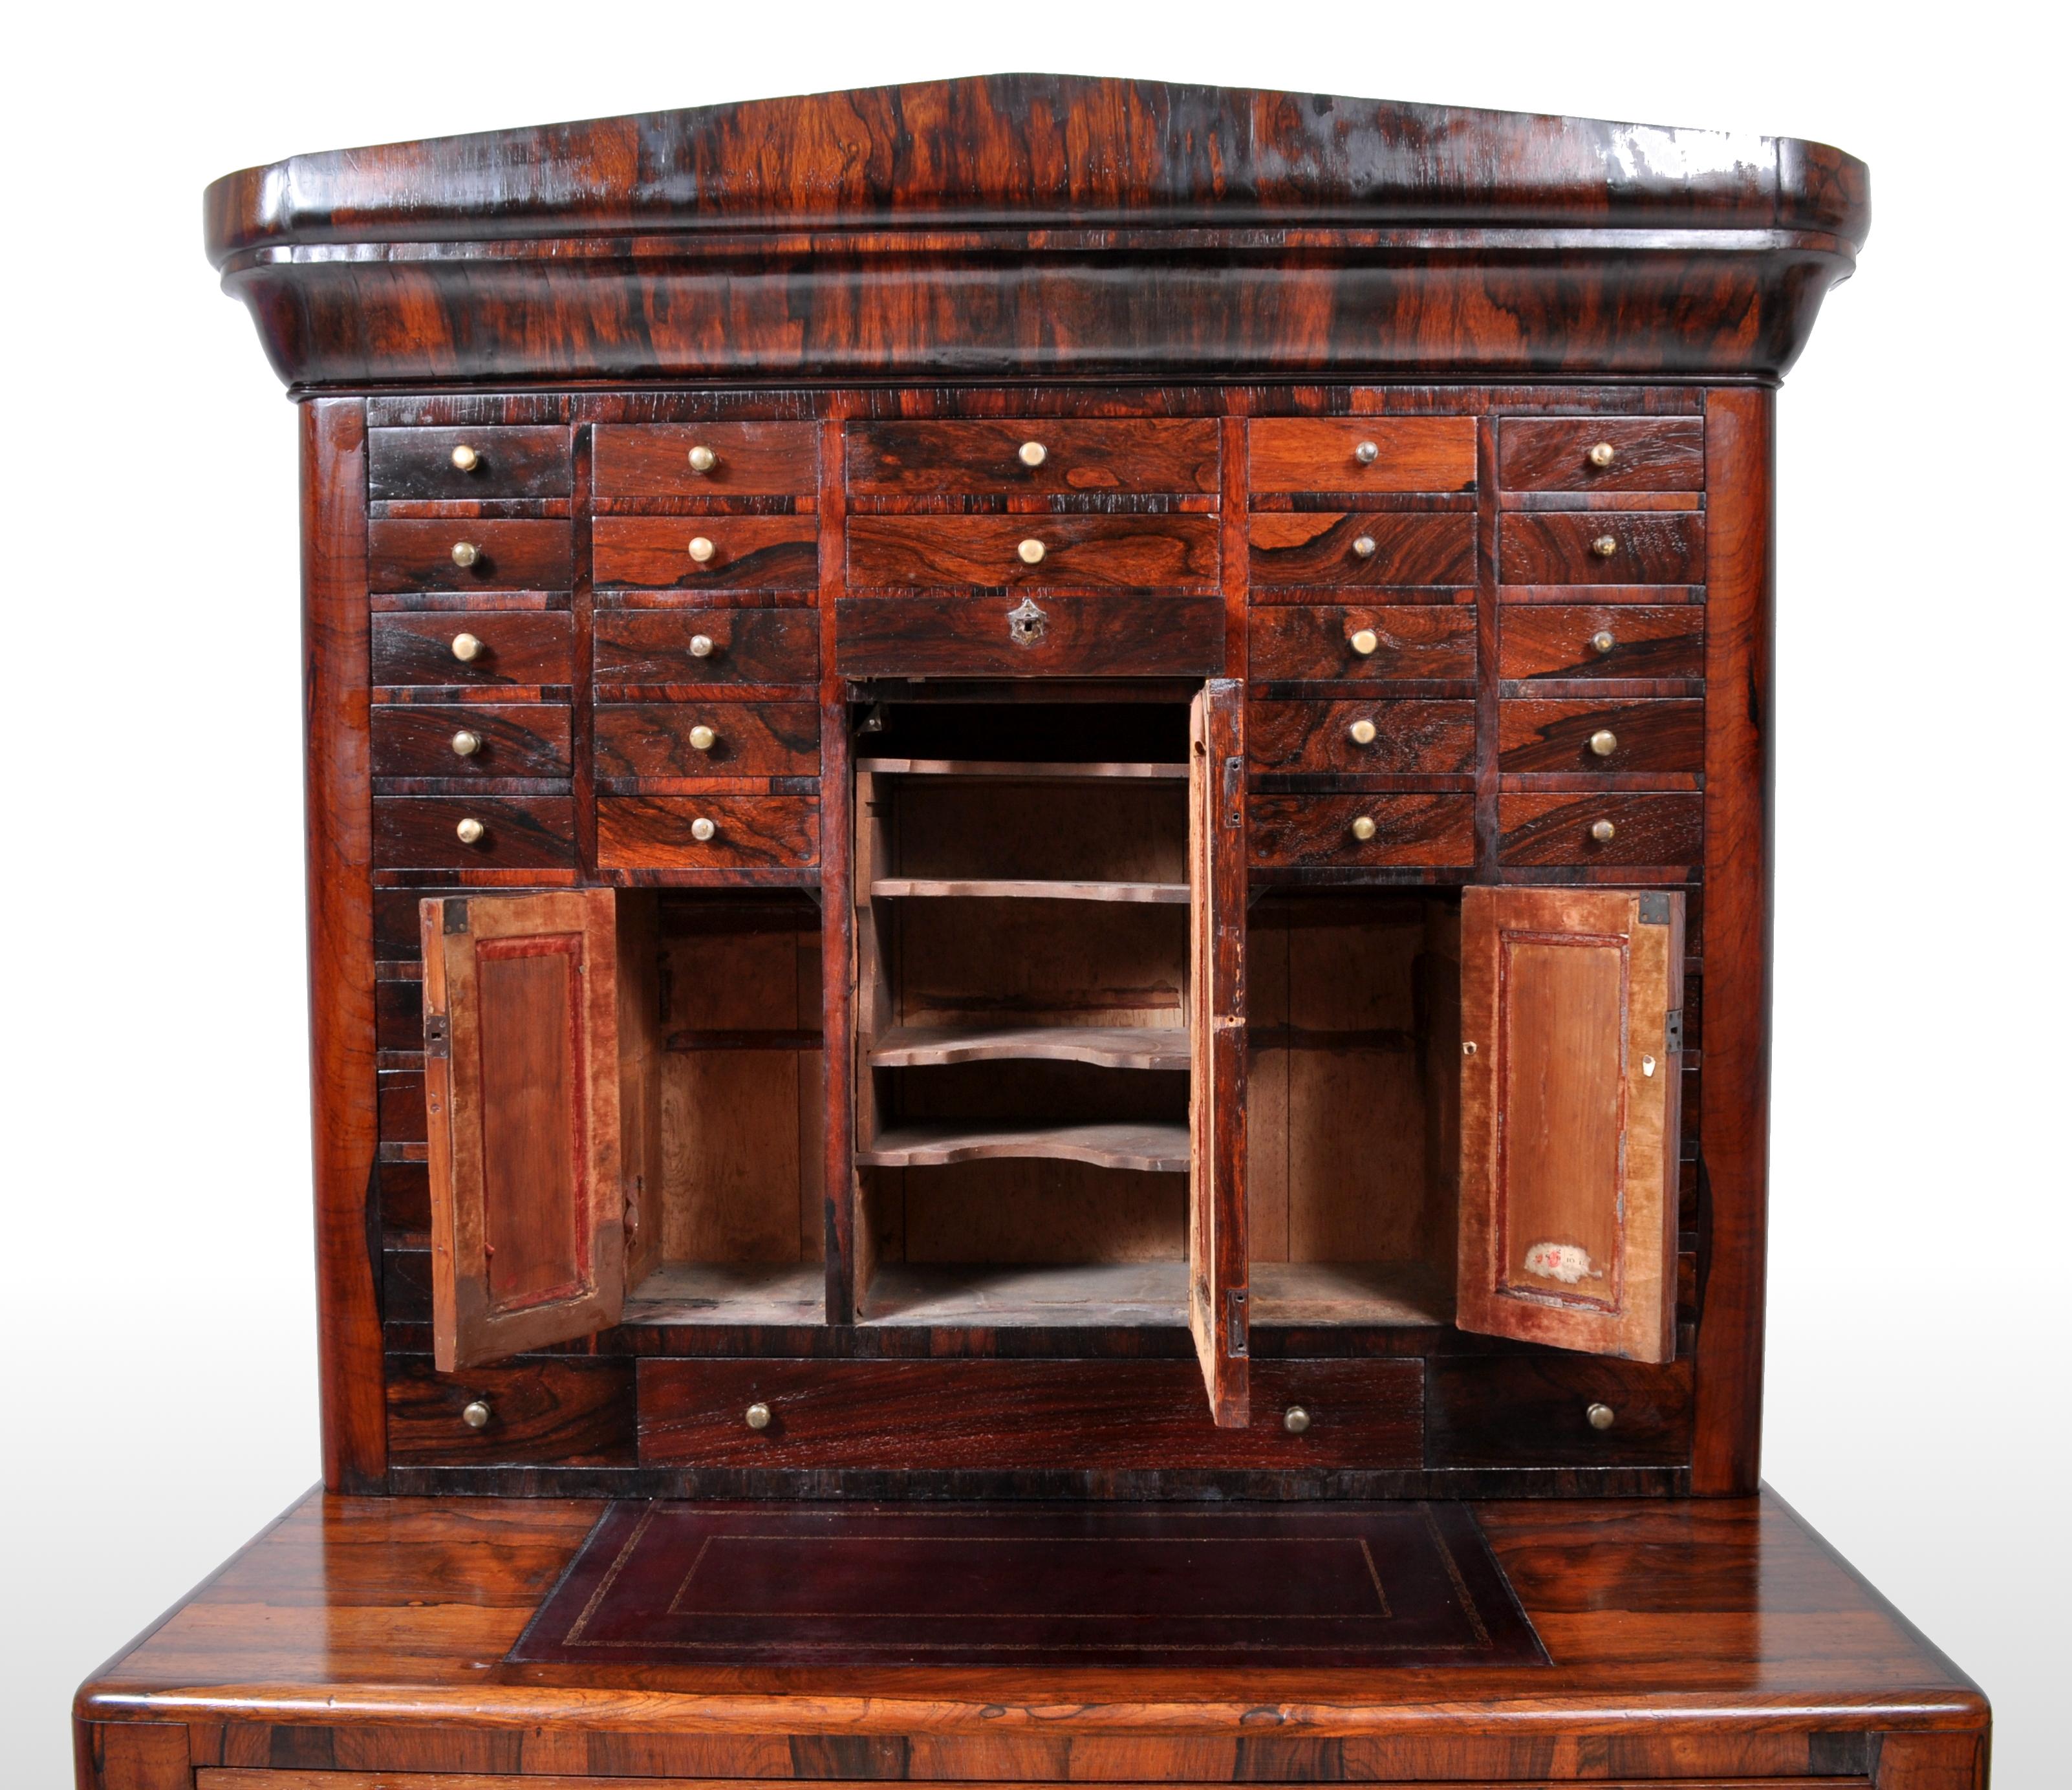 Antique American Empire Rosewood Dental / Medical Cabinet, circa 1820 For Sale 1